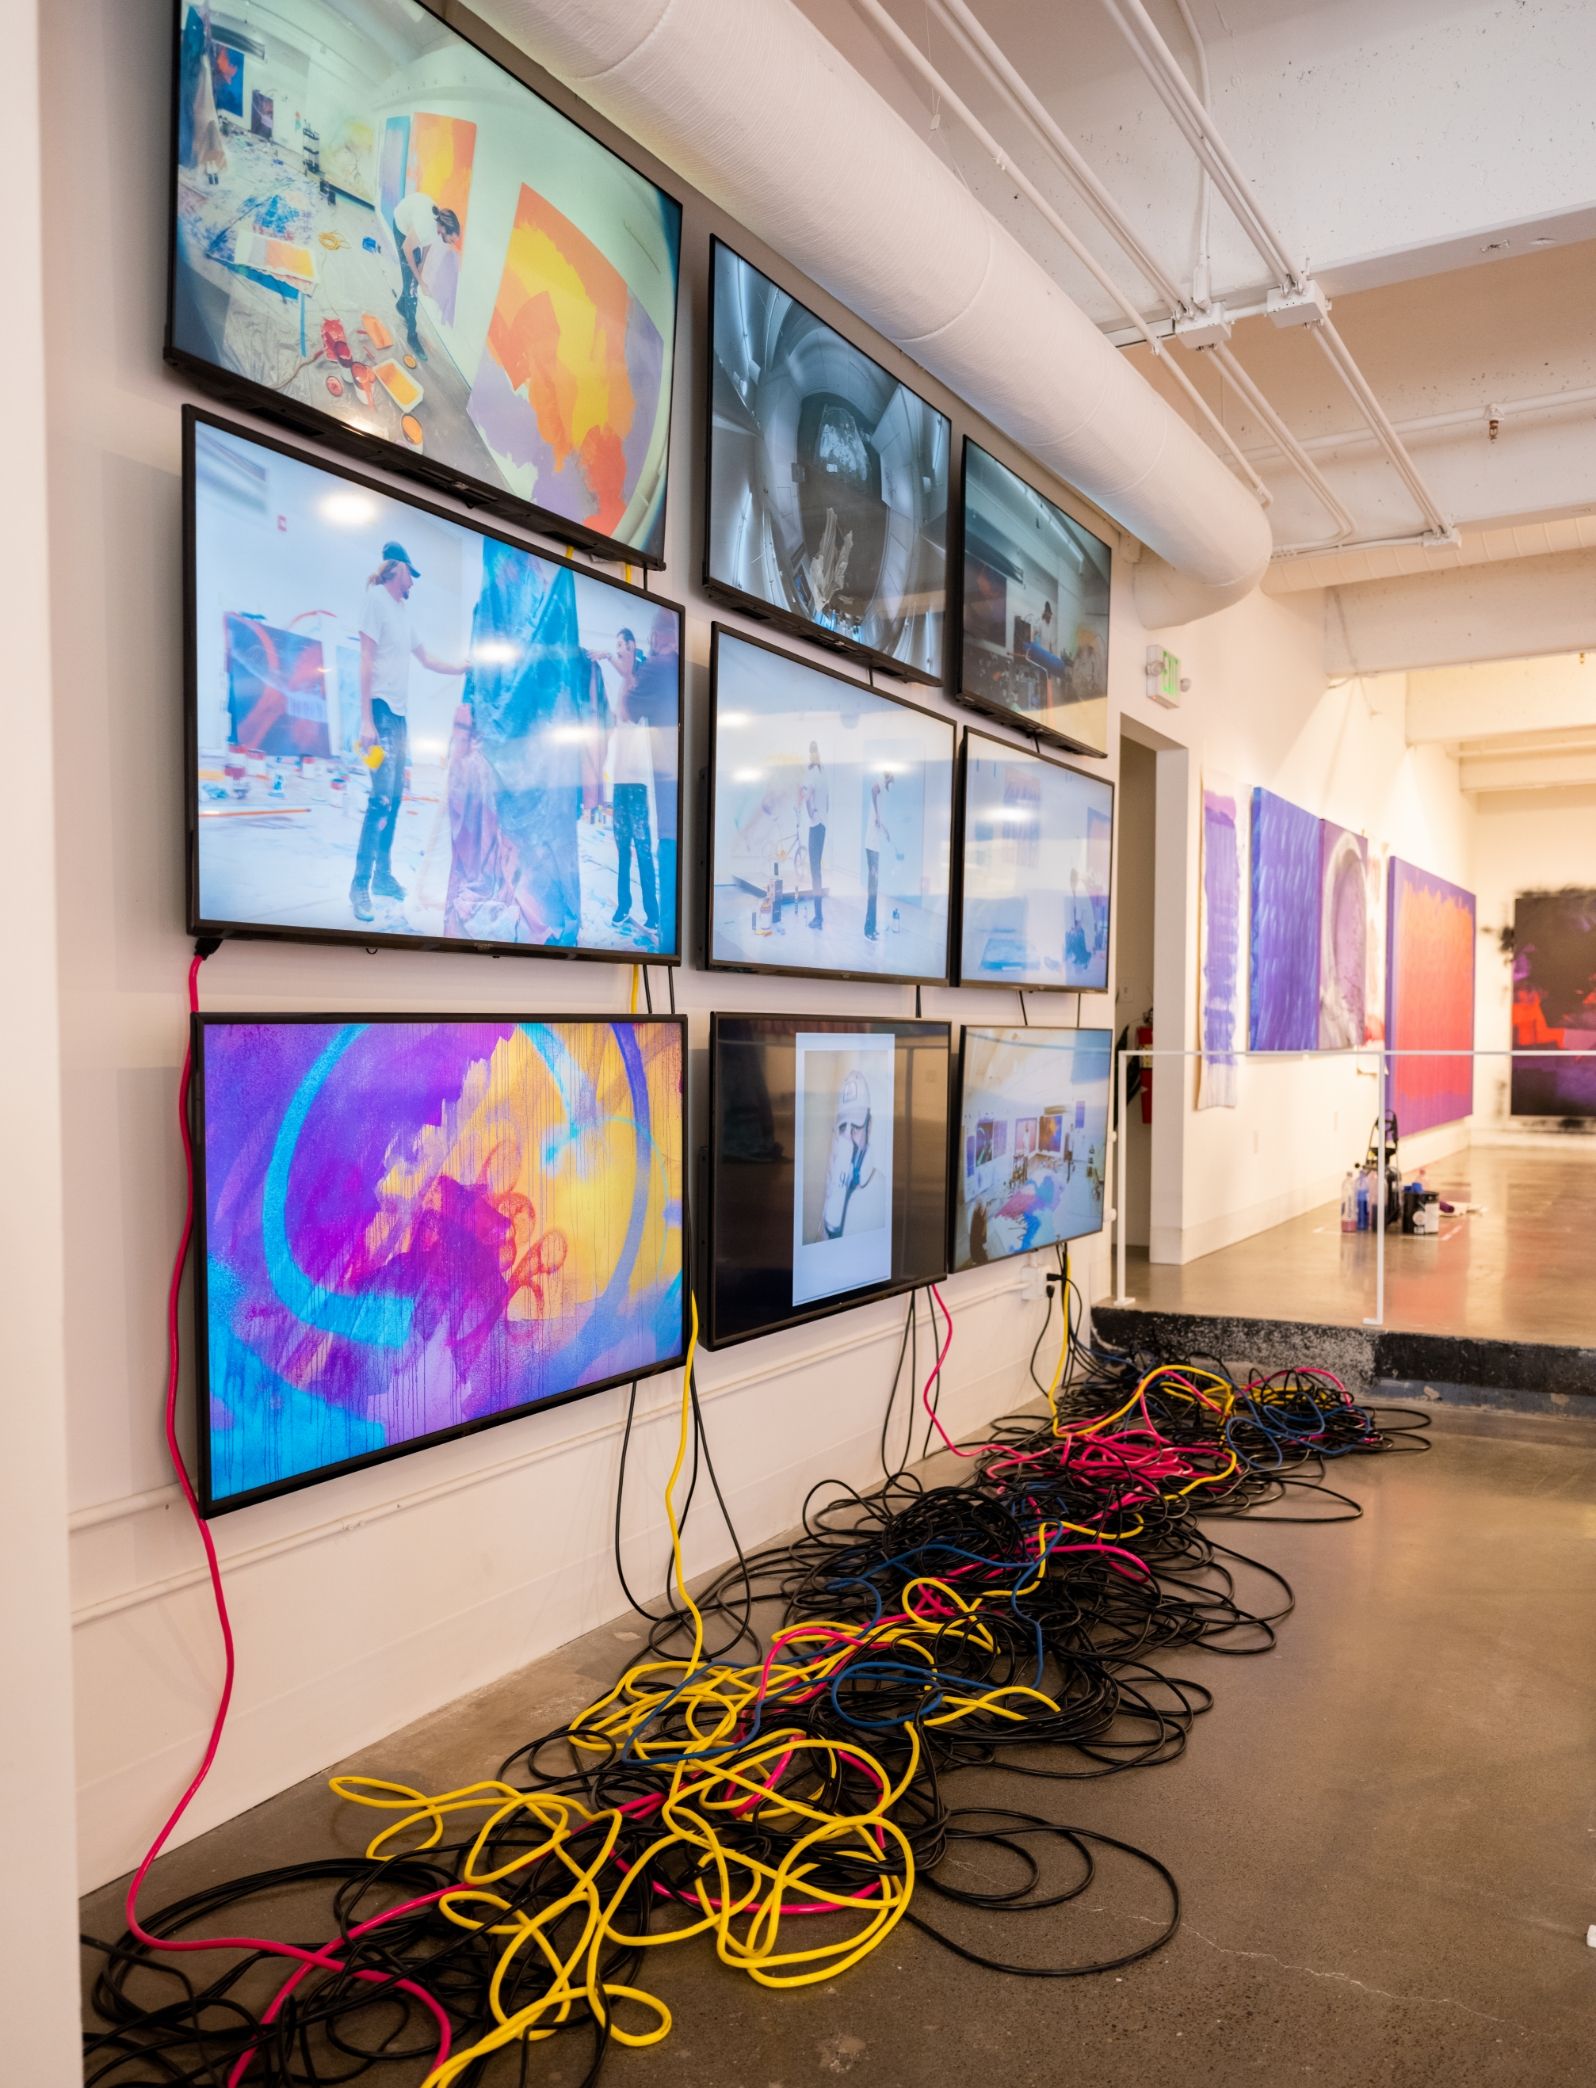 Wall with nine video screens in a grid showing behind the scenes footage of the artists creating the art in show. Large pile of cords sit on floor below screens